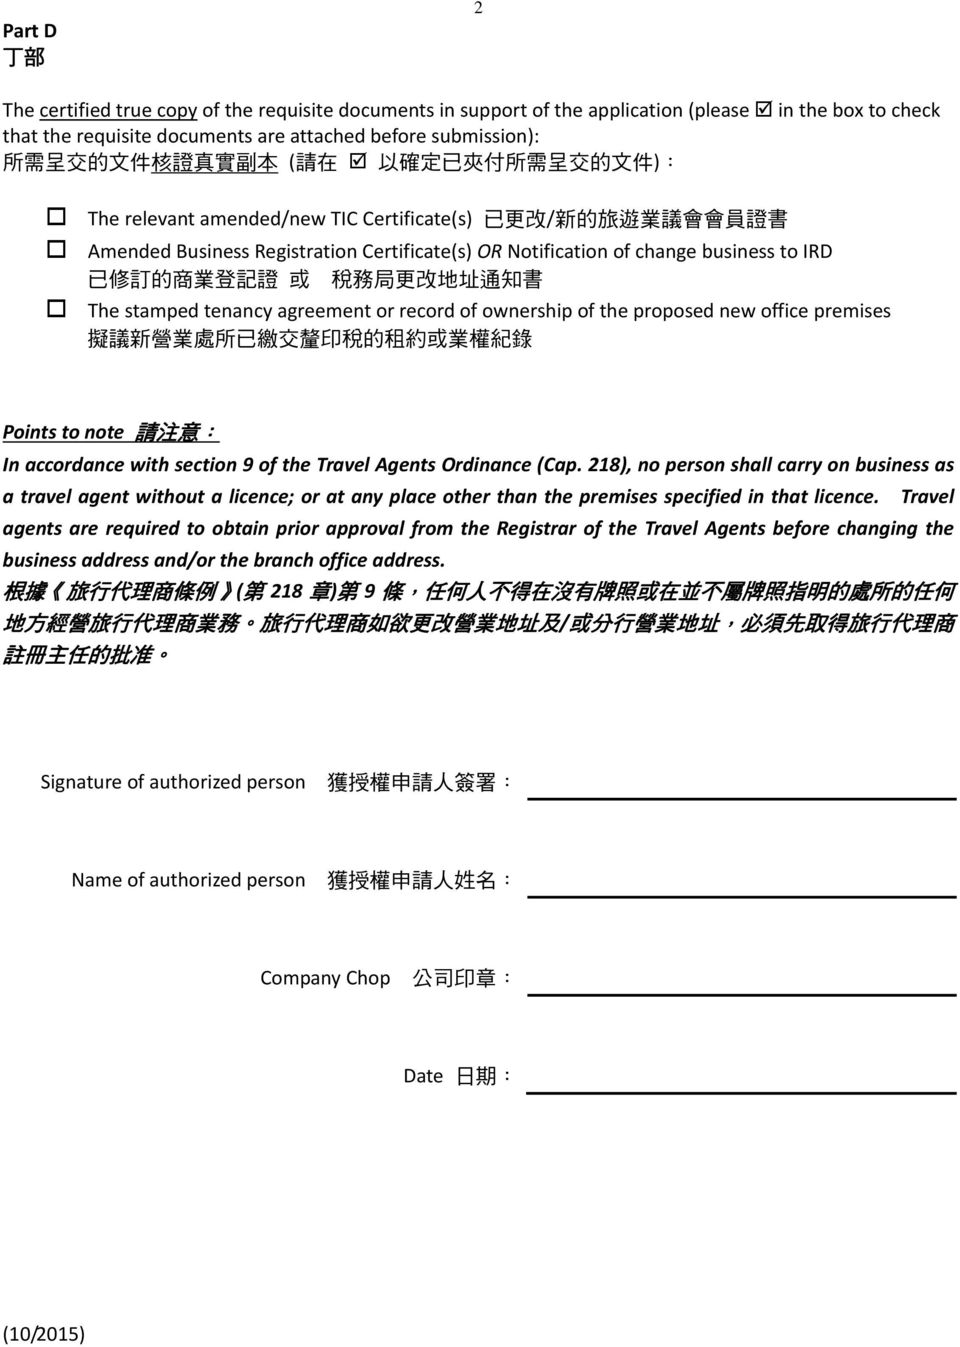 to IRD 已 修 訂 的 商 業 登 記 證 或 稅 務 局 更 改 地 址 通 知 書 The stamped tenancy agreement or record of ownership of the proposed new office premises 擬 議 新 營 業 處 所 已 繳 交 釐 印 稅 的 租 約 或 業 權 紀 錄 Points to note 請 注 意